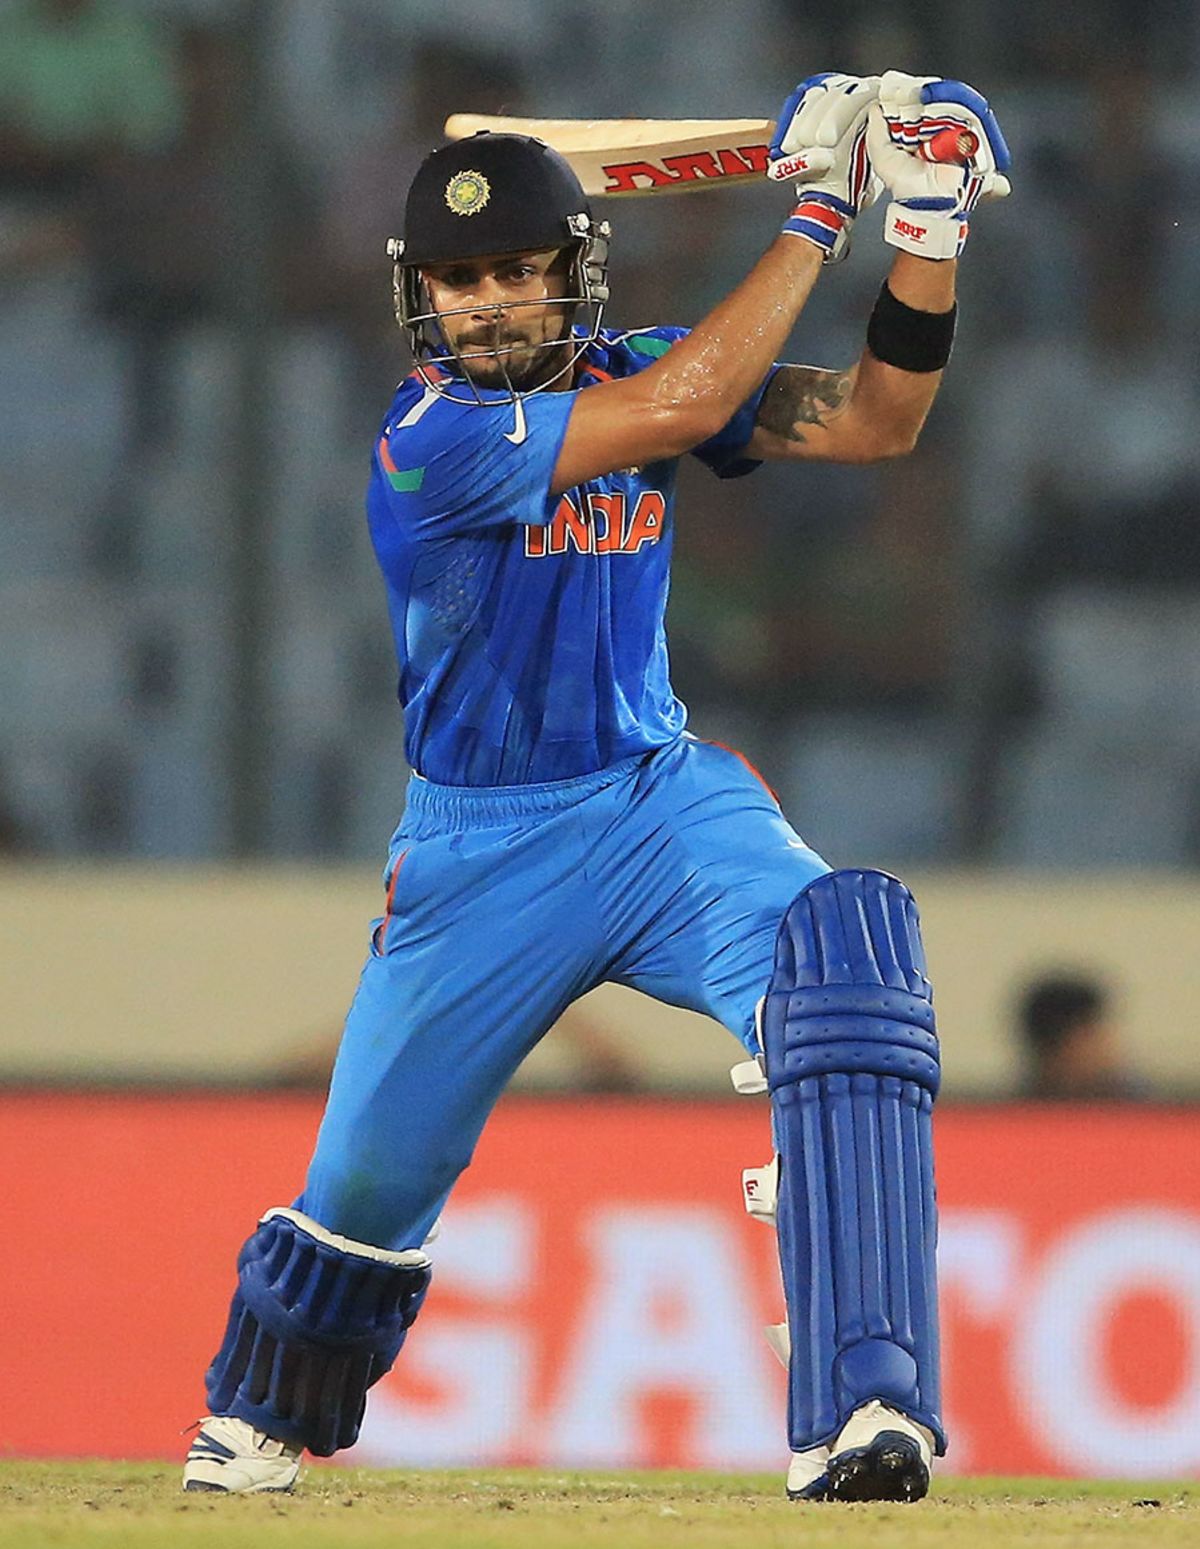 Virat Kohli powers the ball through the off side, India v West Indies, World T20, Group 2, Mirpur, March 23, 2014